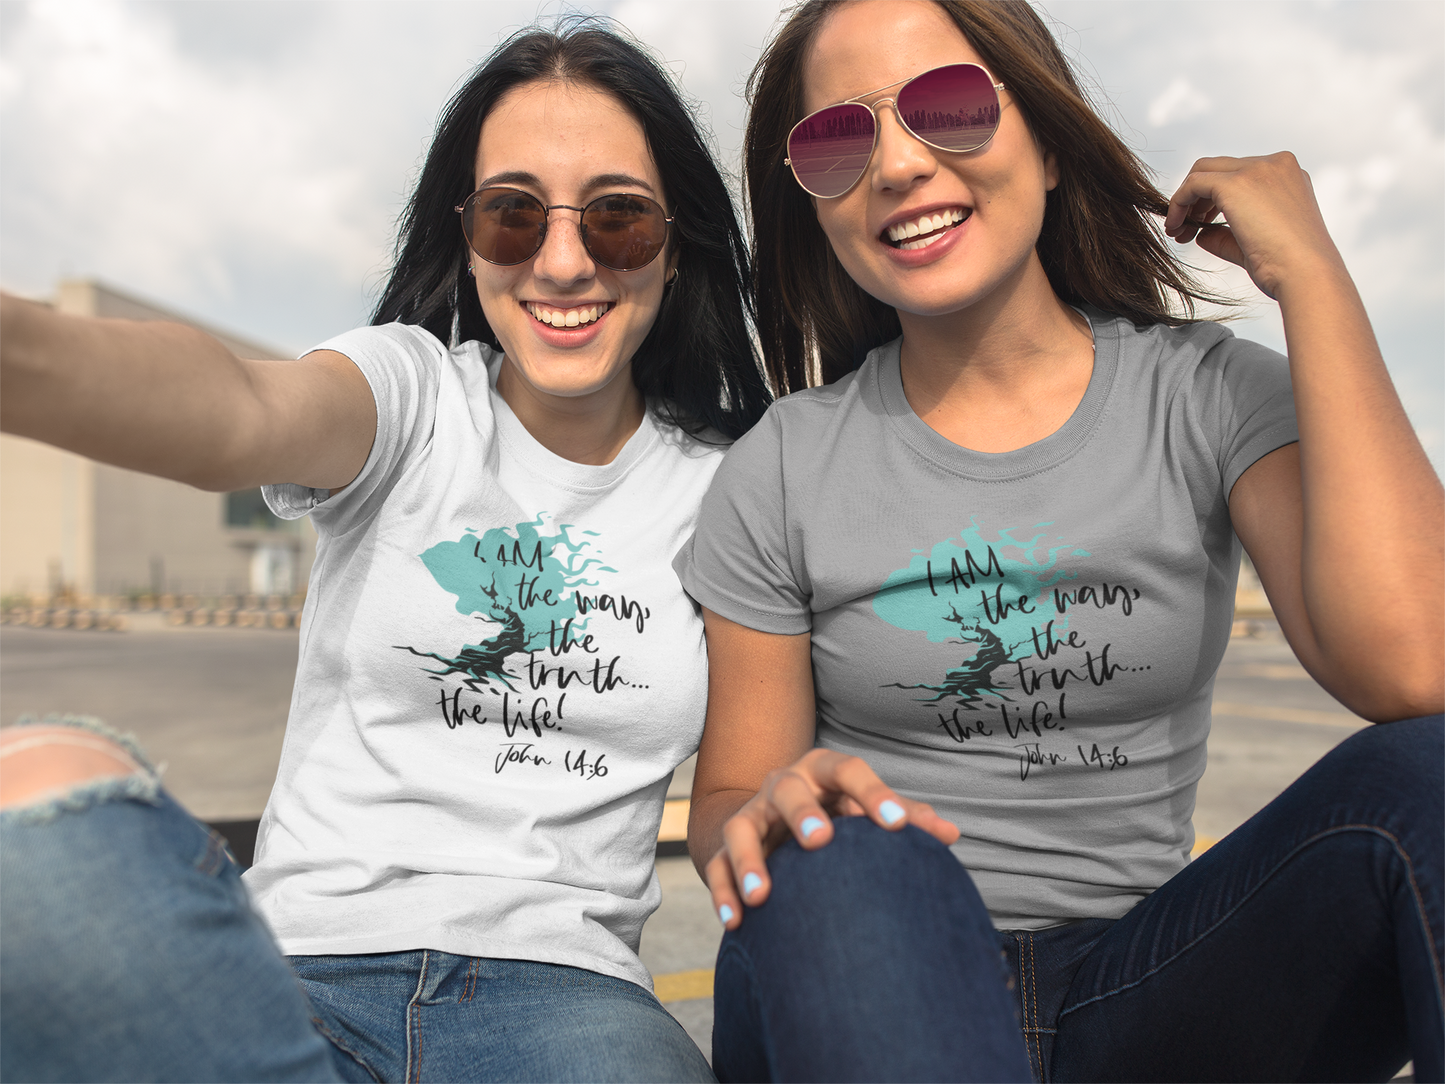 "I AM" the Way, the Truth, The Life John 14:6 Inspirational Jesus T-Shirt - - Endlessly Trendy Boutique